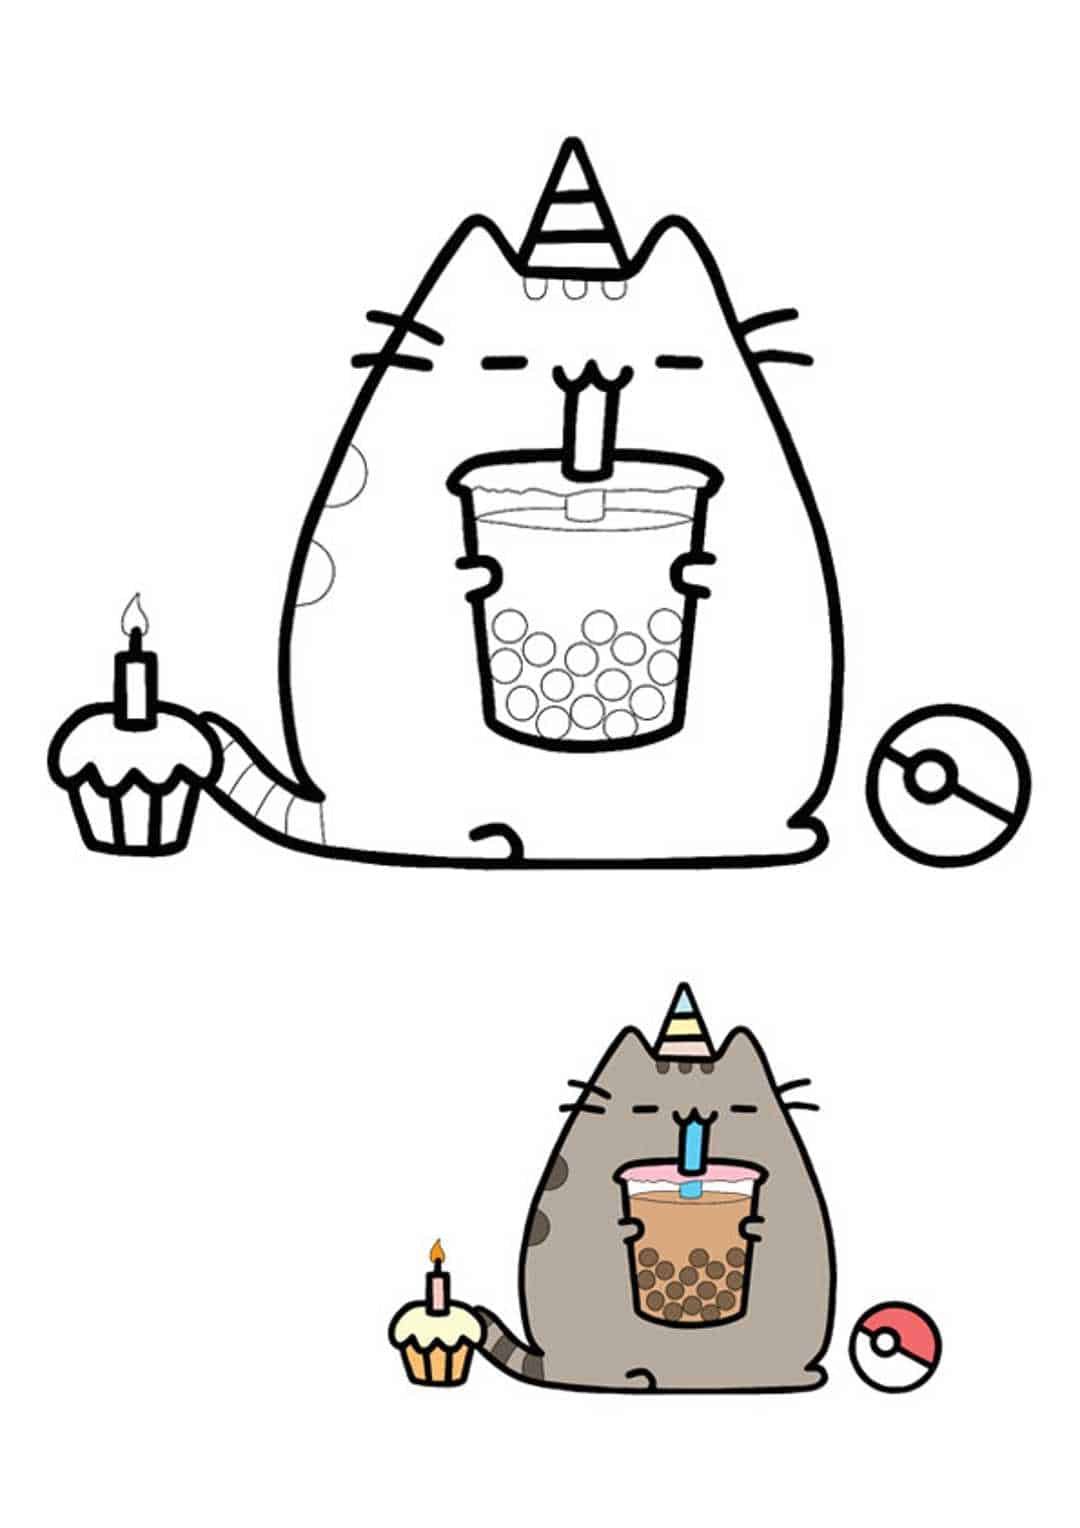 Pusheen unicorn coloring pages